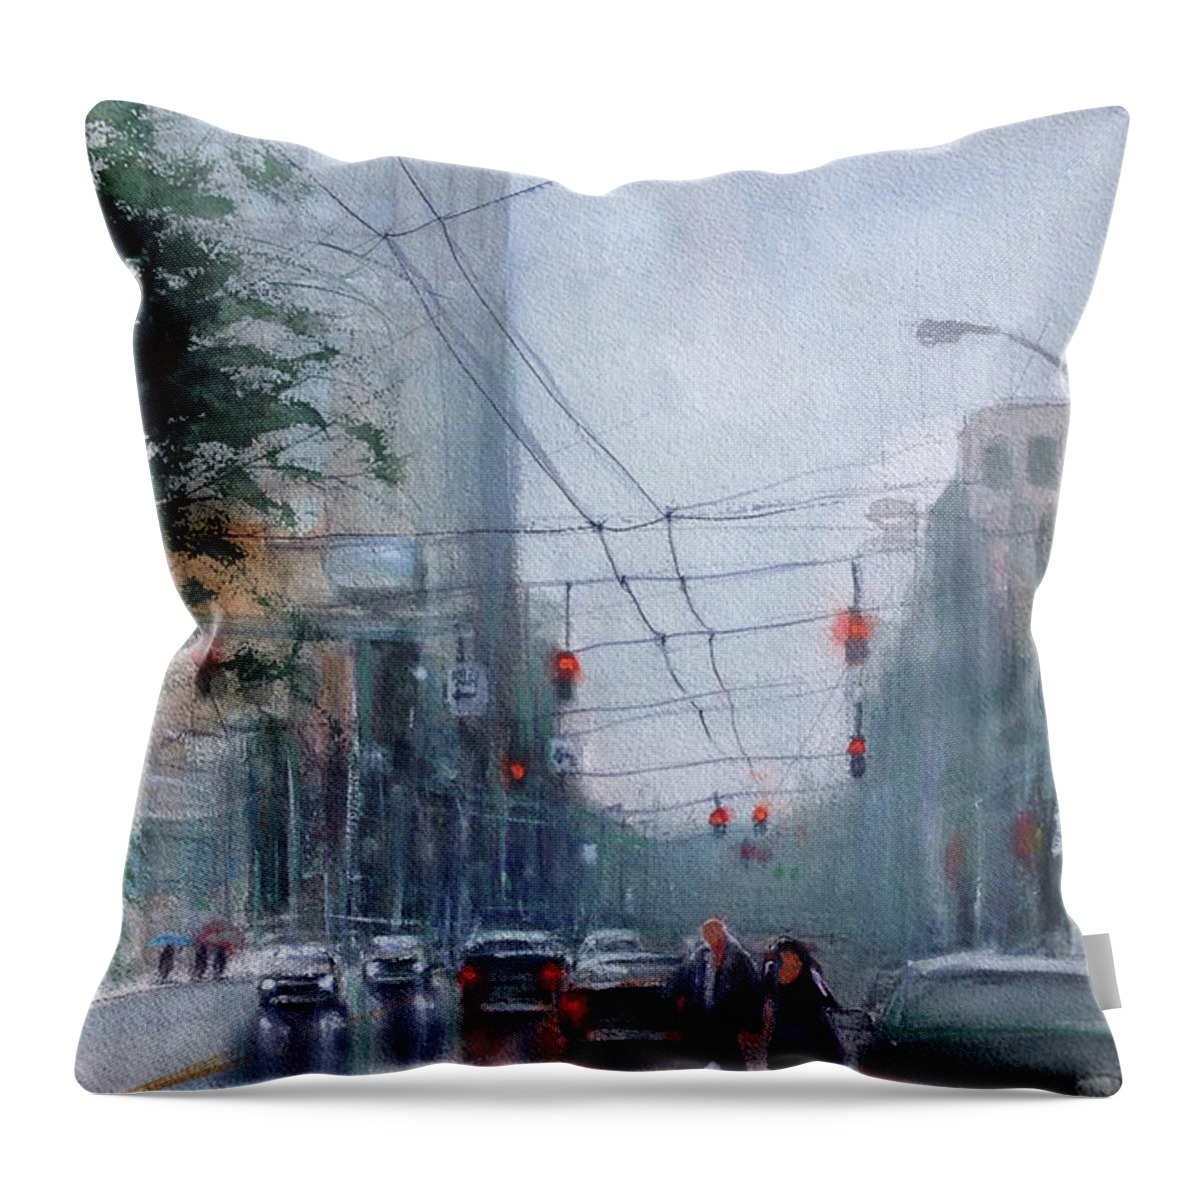 Dayton Throw Pillow featuring the painting Rainy Downtown Dayton Day by Gregory DeGroat